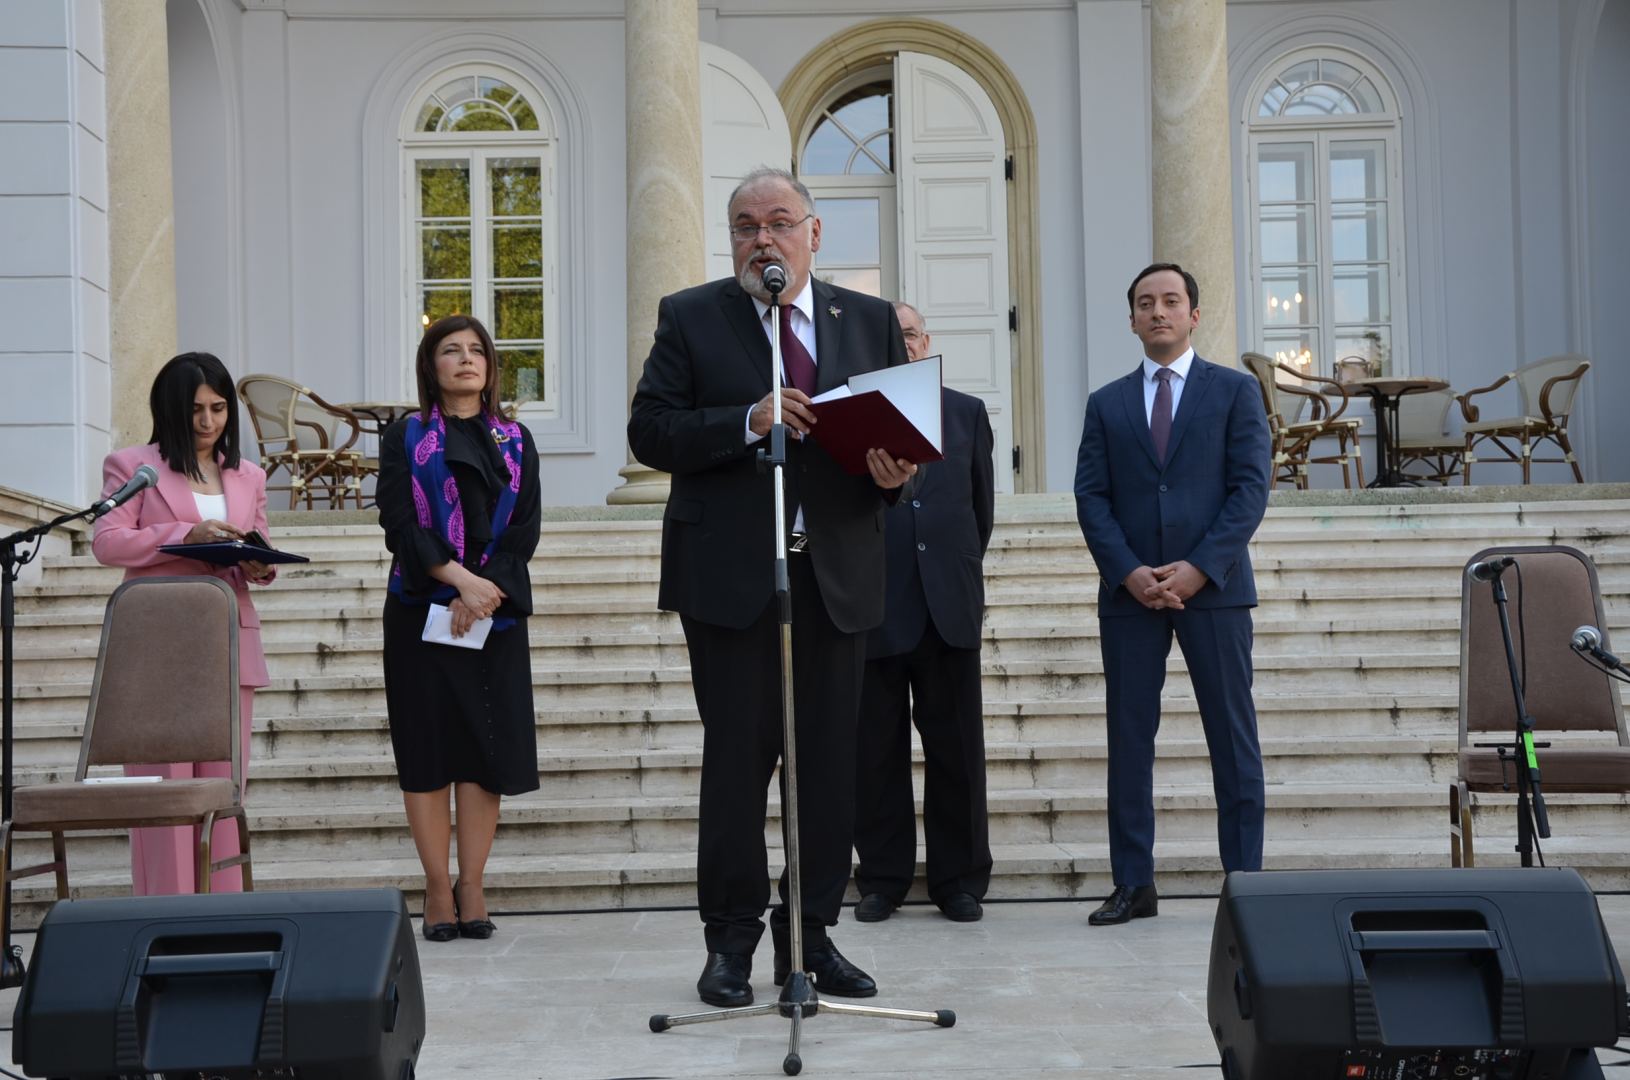 Budapest hosts celebration of Independence Day of Azerbaijan, 100th anniversary of Great Leader Heydar Aliyev (PHOTO)